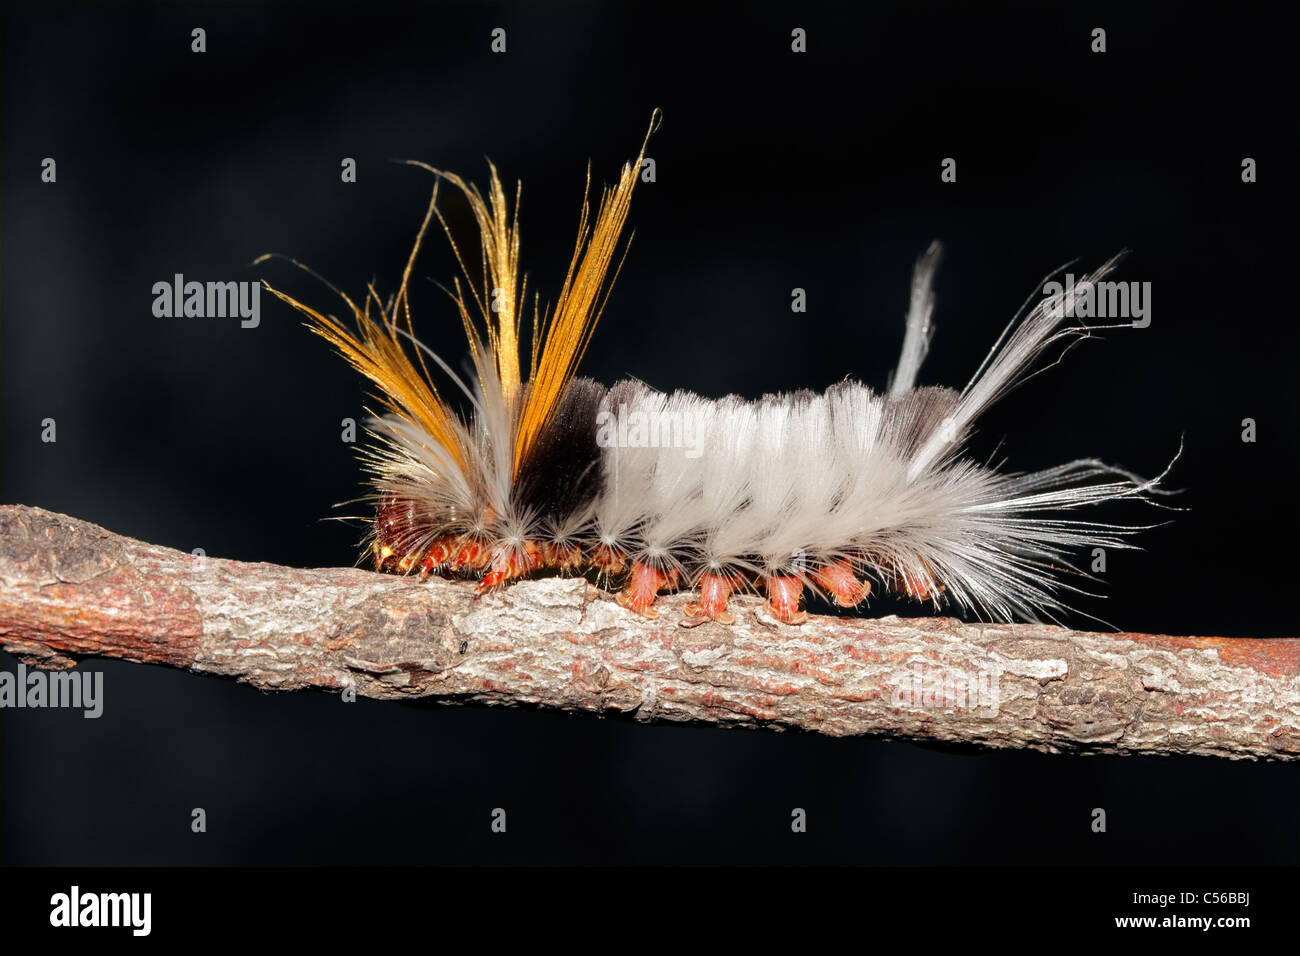 A hairy caterpillar on a branch against a dark background Stock Photo